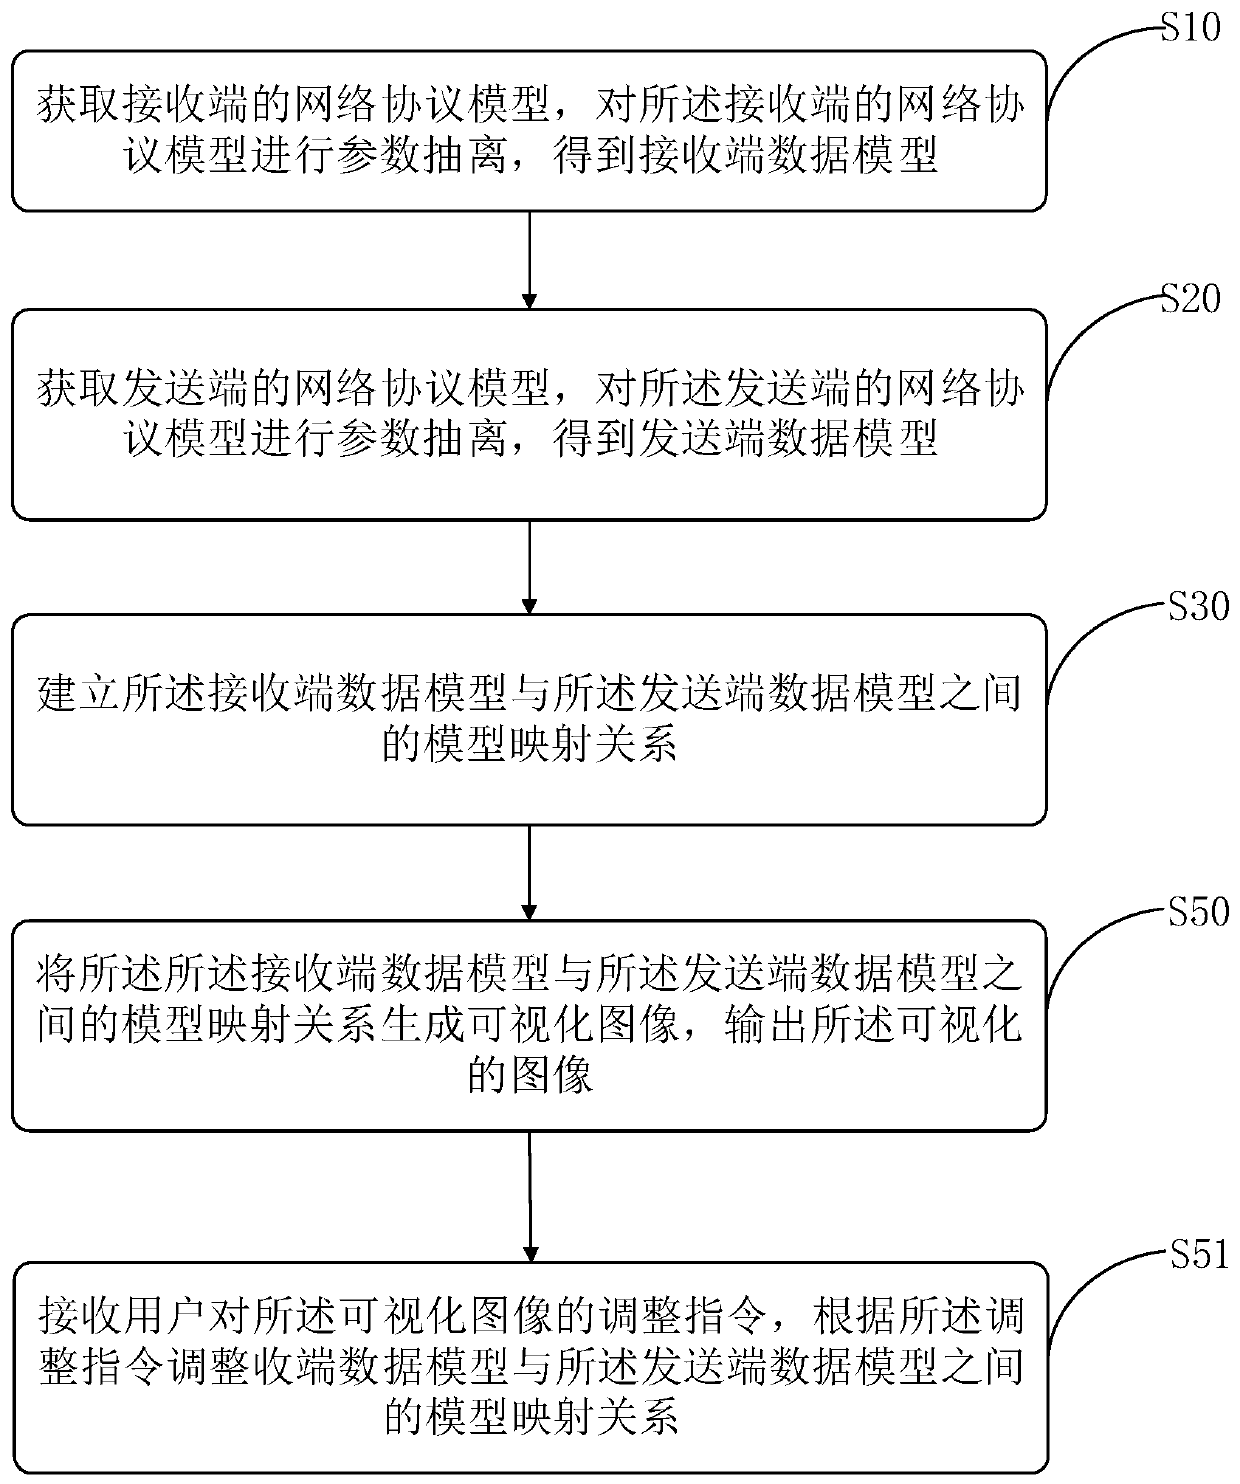 Configuration parameter management method and device, storage medium and control terminal